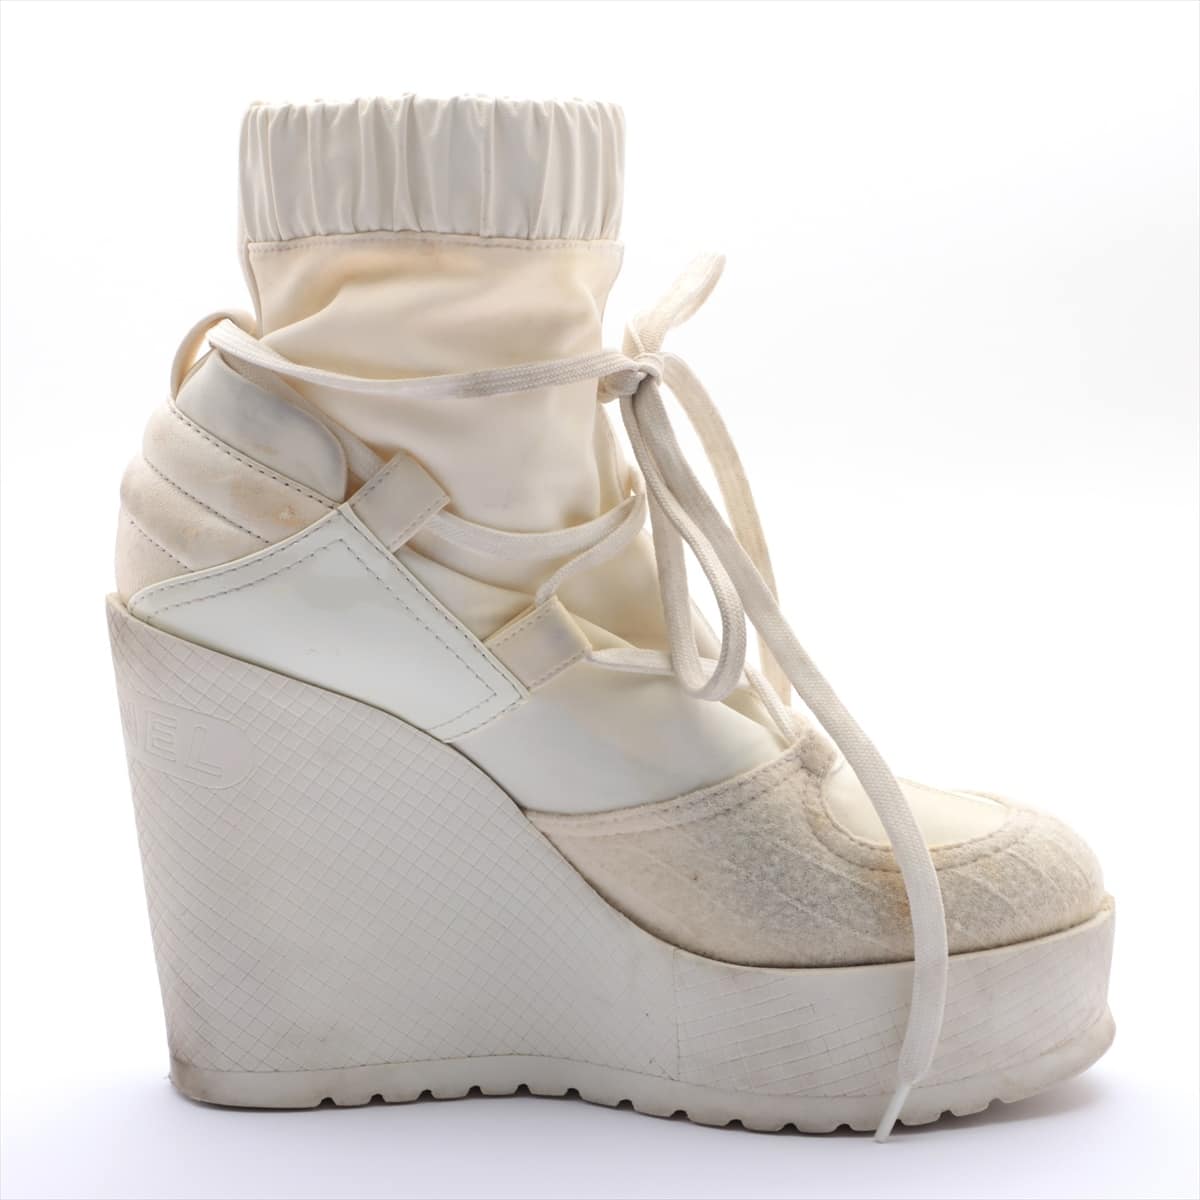 Chanel Coco Mark Fabric Sneakers 38 1/2 Ladies' White